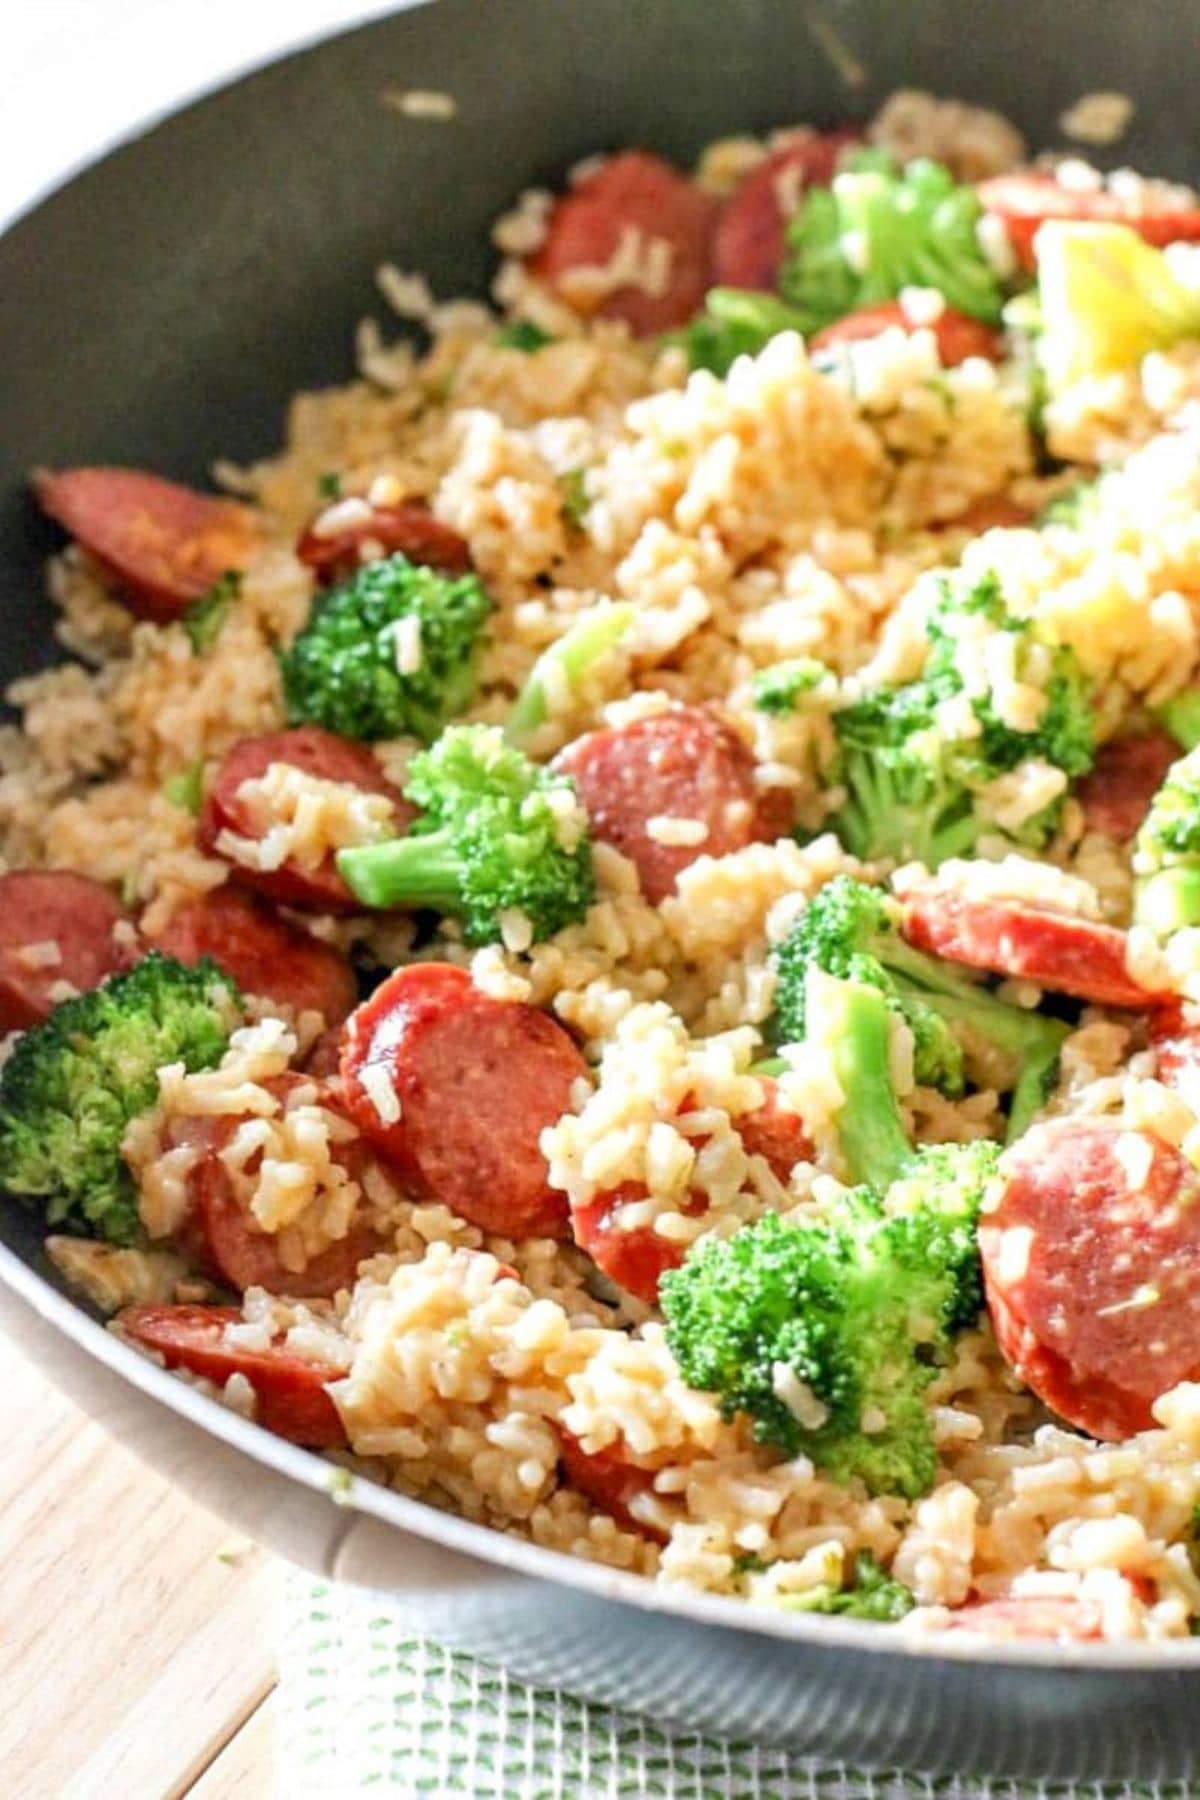 Rice in large bowl with broccoli and sausage